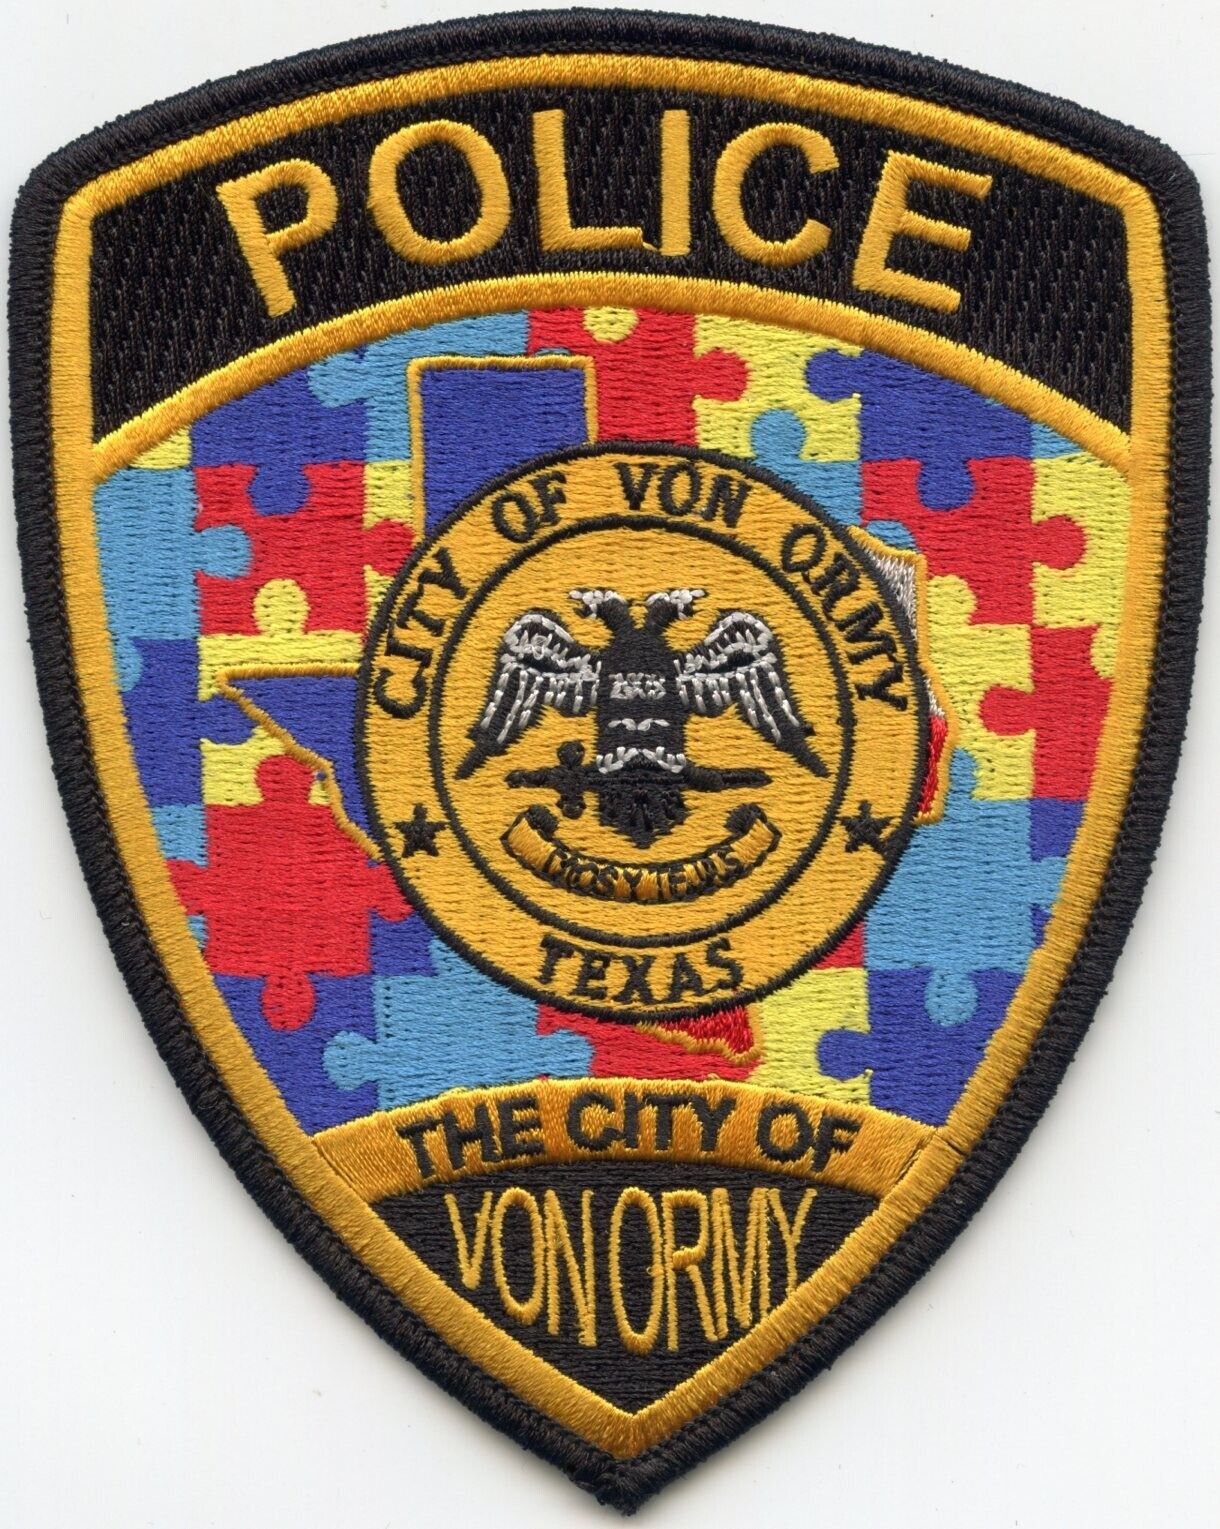 VON ORMY TEXAS AUTISM AWARENESS POLICE PATCH